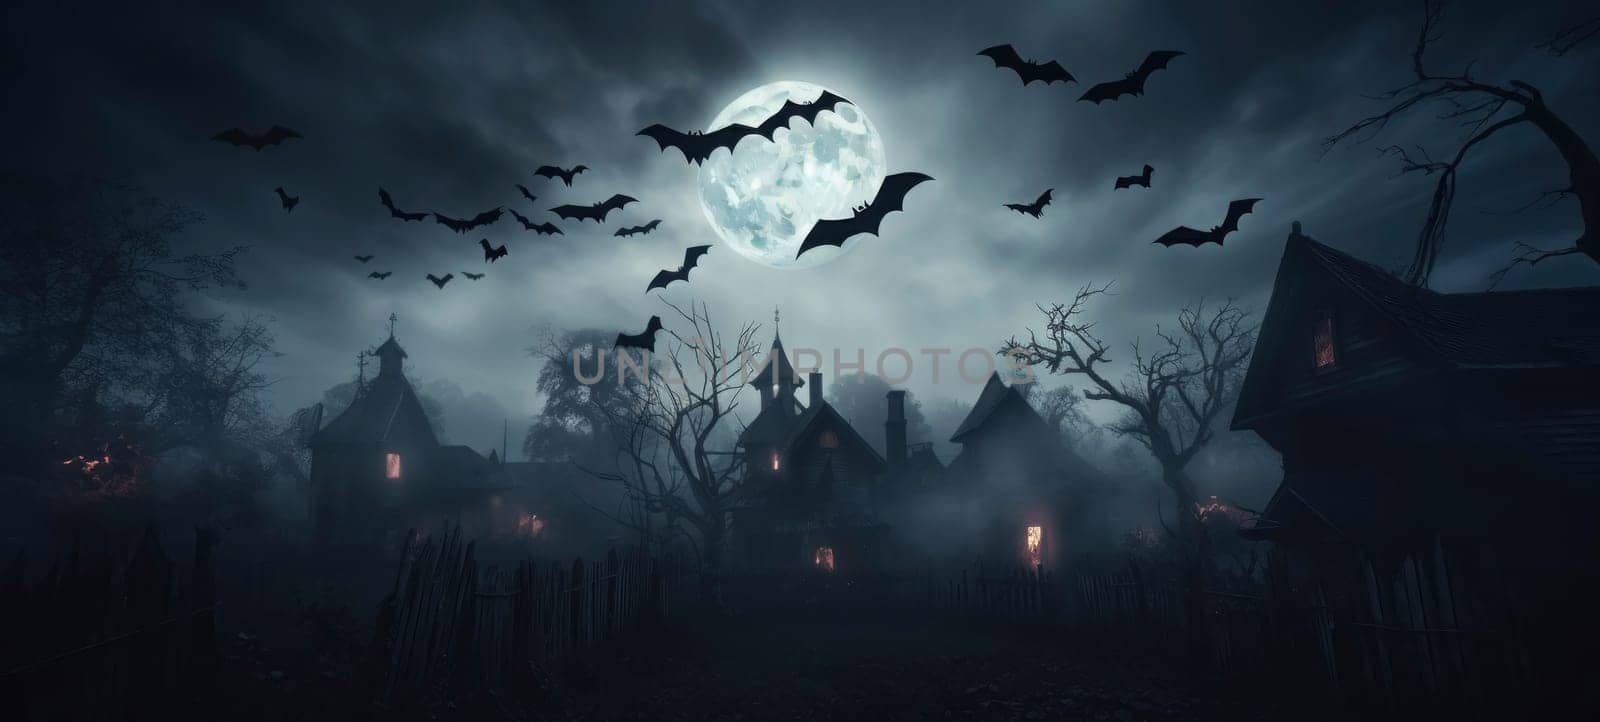 An eerie, moonlit night over a mysterious gothic village swarming with bats, perfect for Halloween themes.